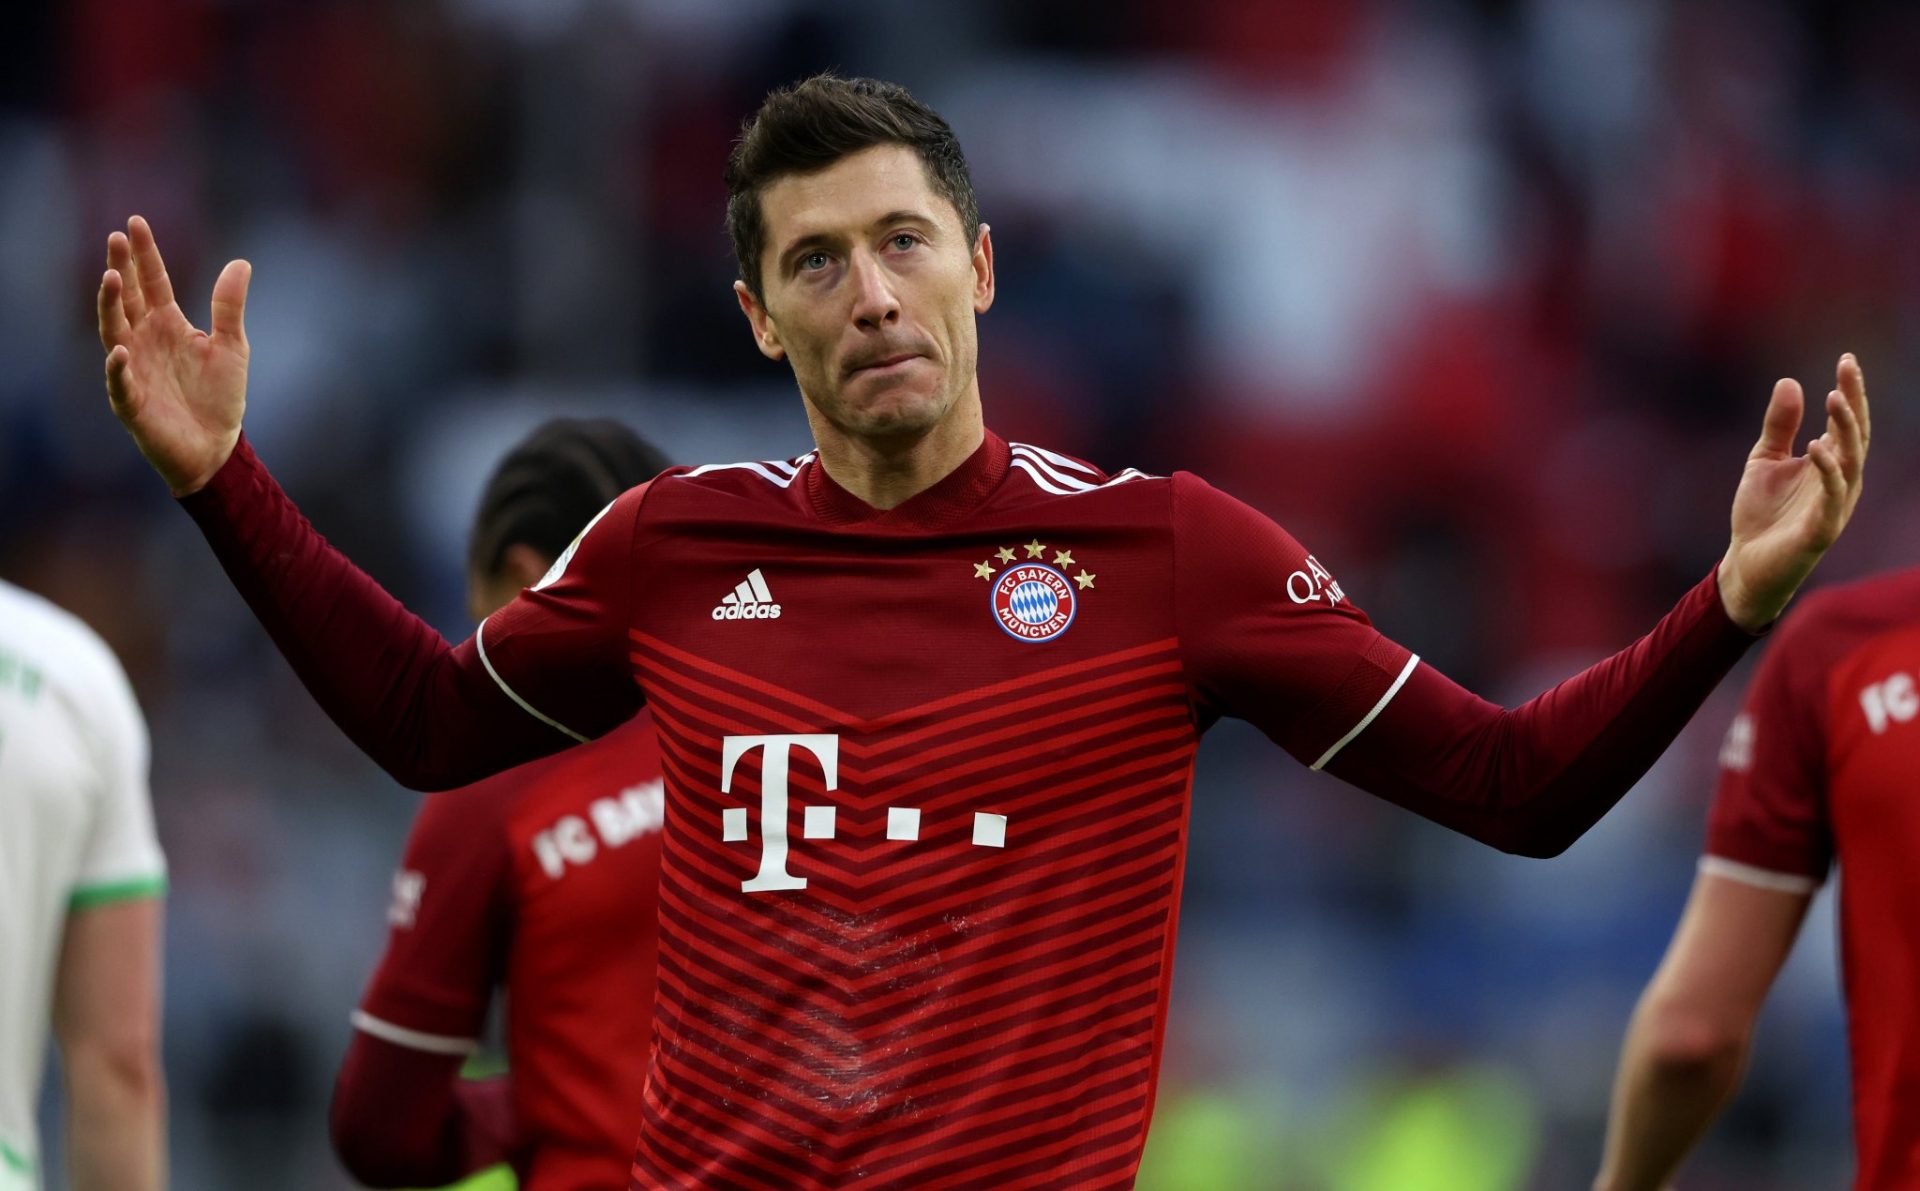 Bayern Munich are reportedly yet to open talks with Robert Lewandowski over a new contract.